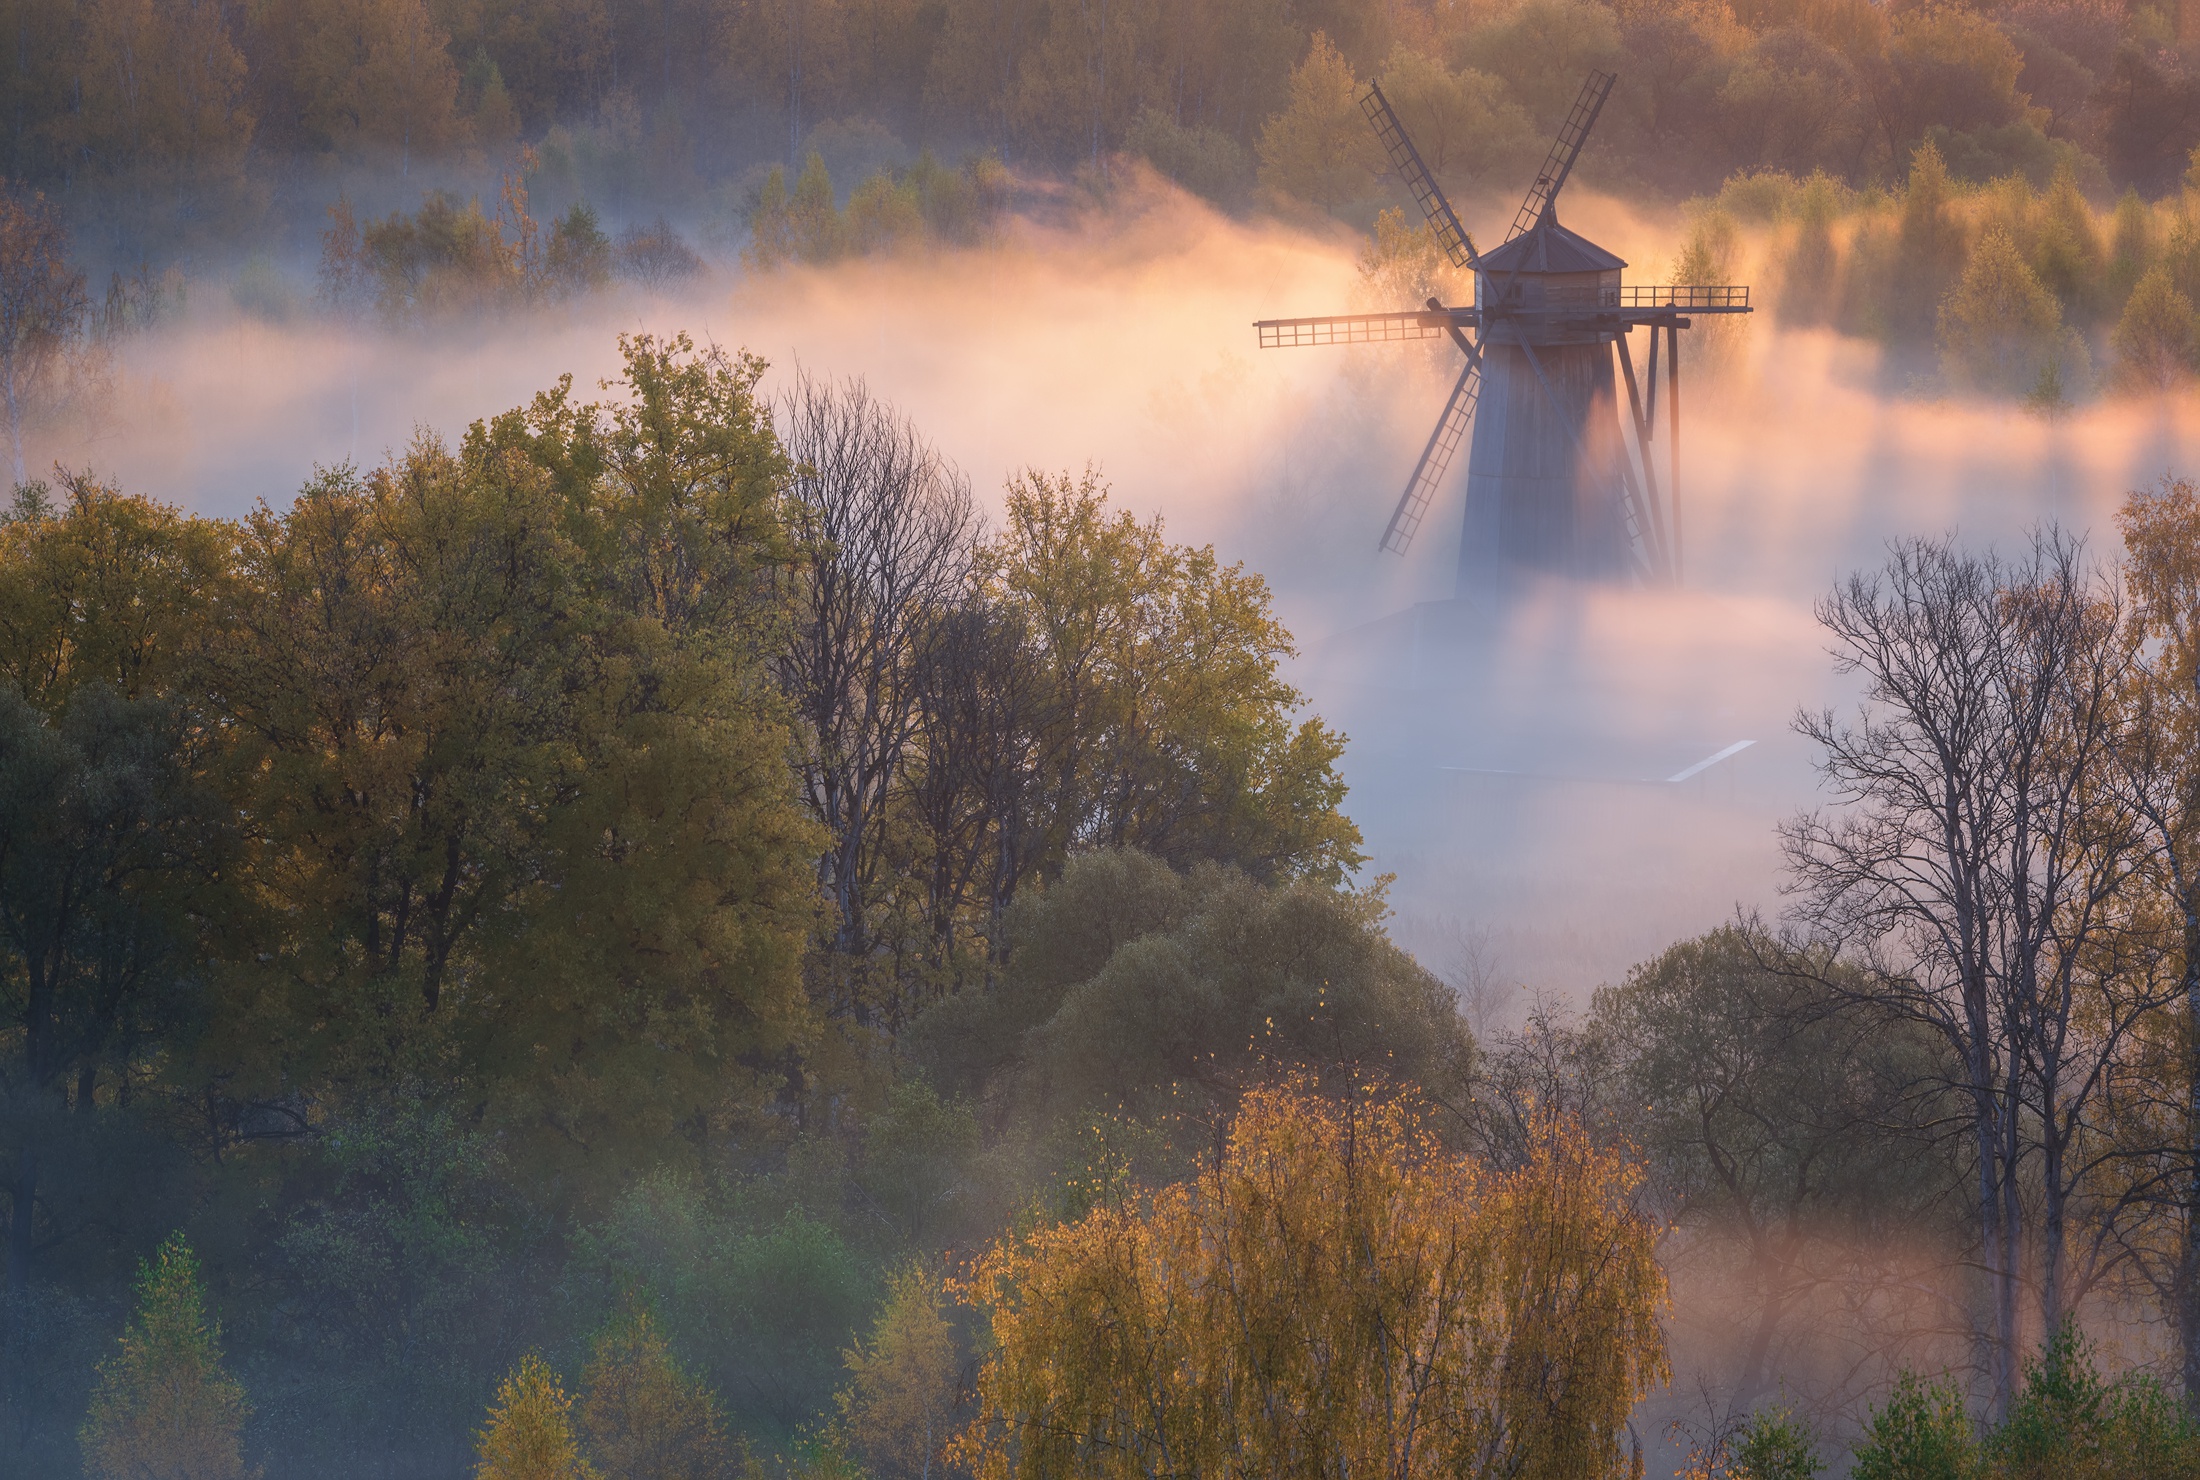 dawn, man made, windmill collection of HD images